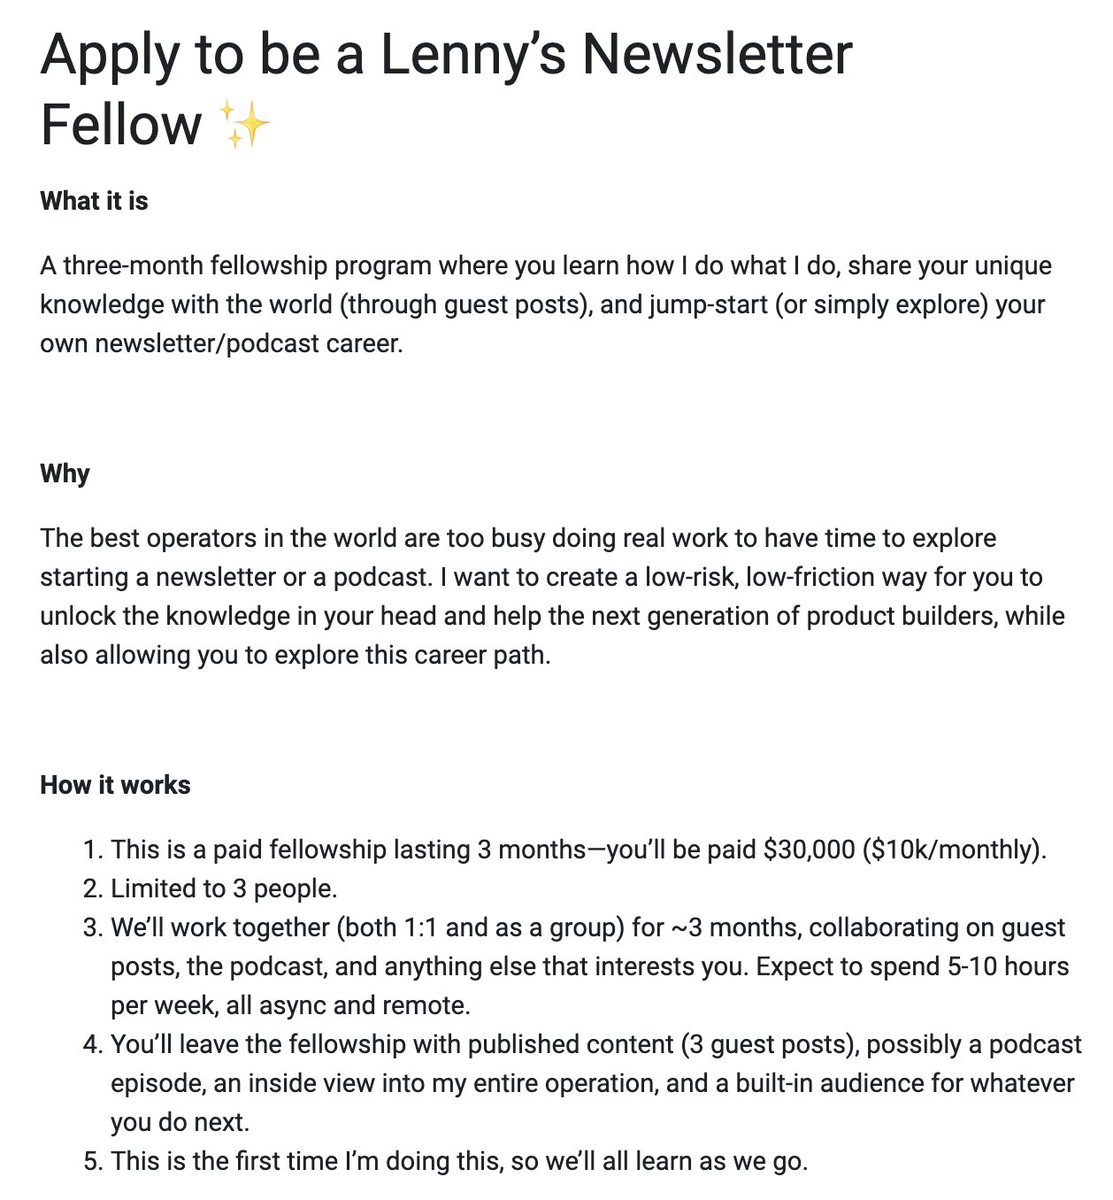 💥🧑‍🎓 Announcing: Lenny’s Newsletter Fellowship Program I’m launching a three-month fellowship program, and applications are now open. What it is: Work alongside me to learn how I do what I do, share your unique knowledge with the world (through guest posts), and jump-start (or